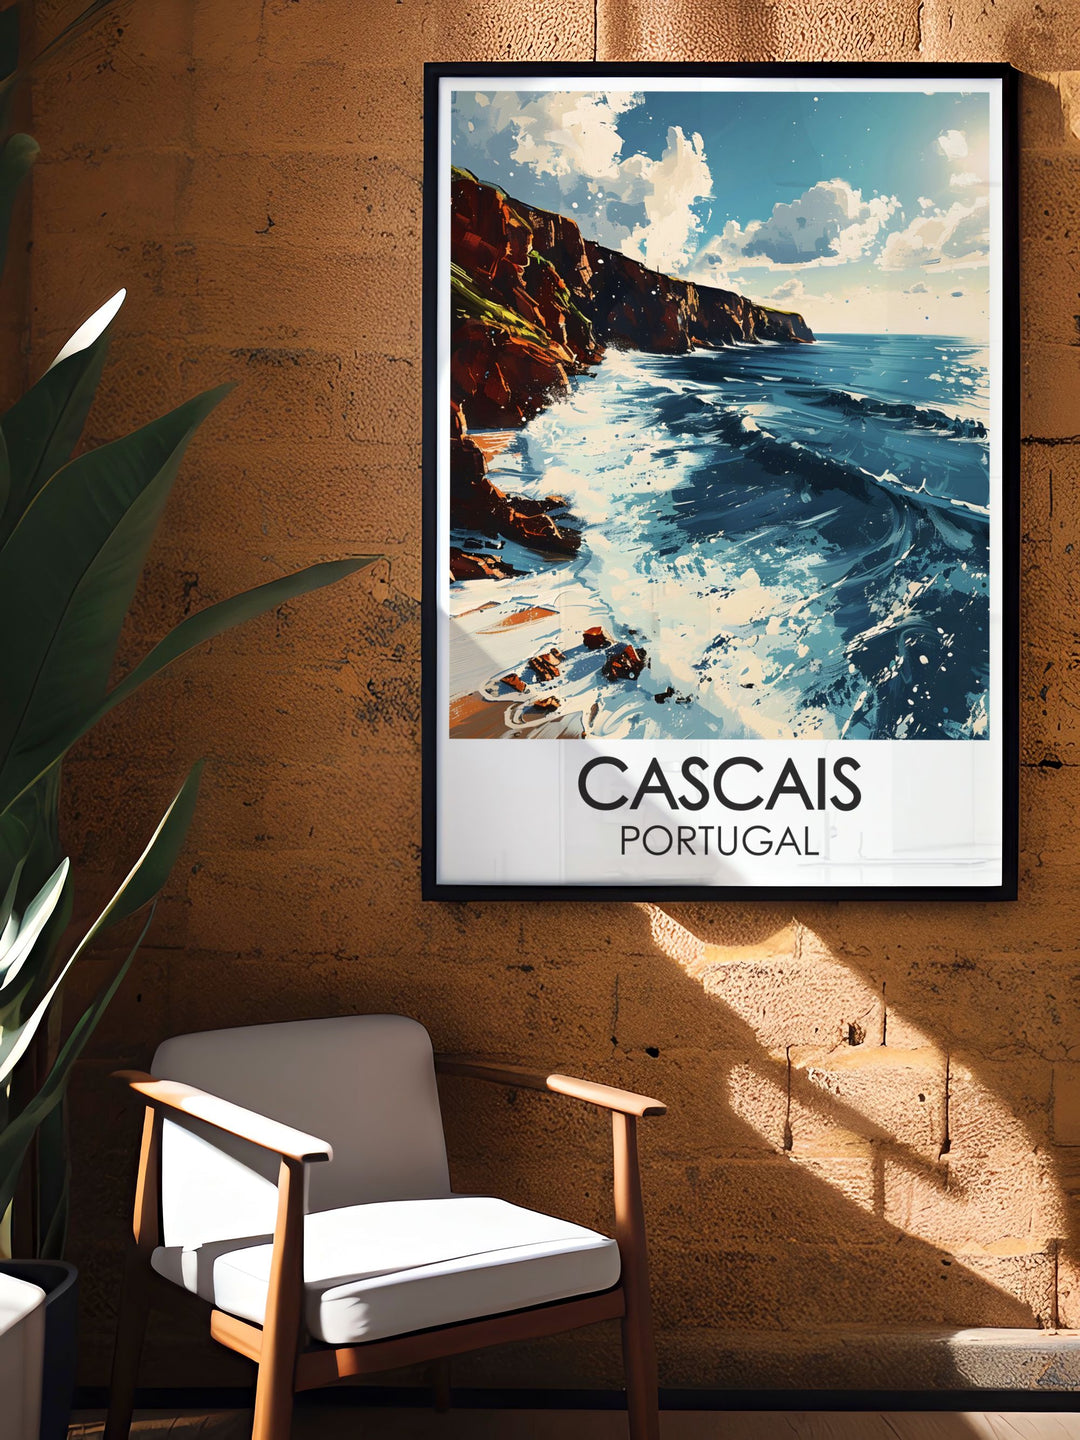 An artistic representation of Cascais Marina, highlighting the elegant yachts and vibrant waterfront that define this picturesque location in Portugal.